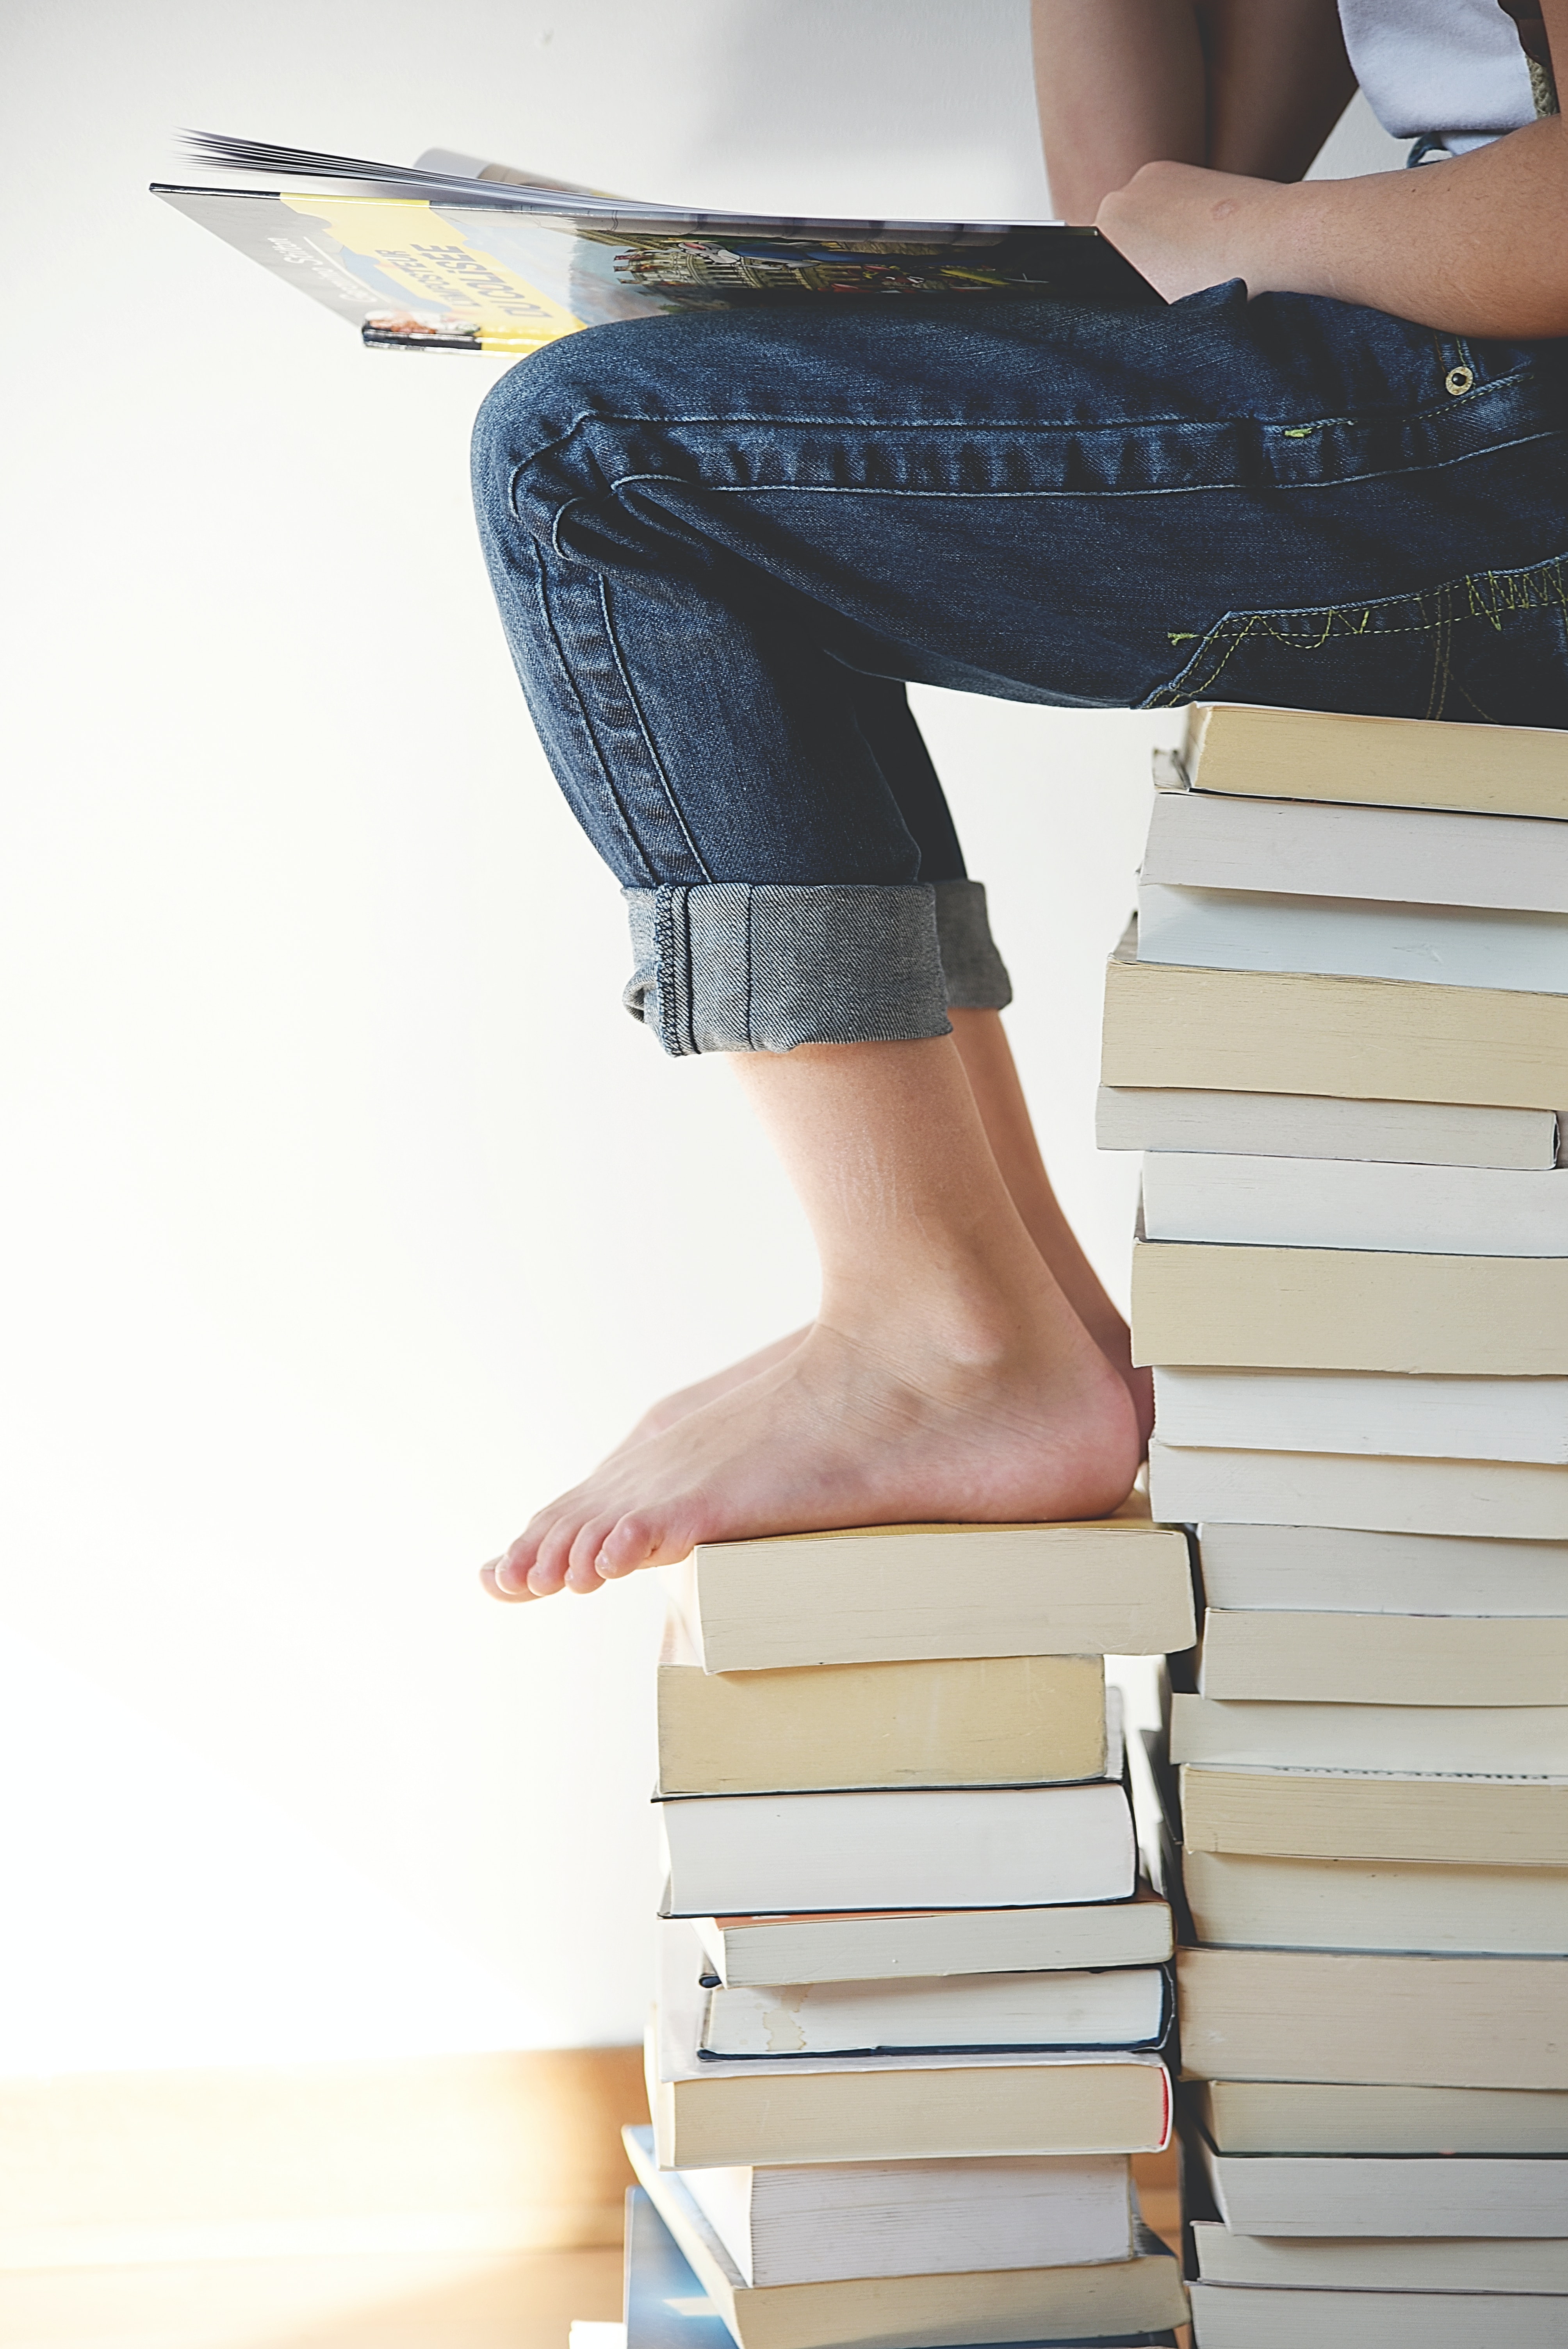 Child's feet on a stack of books